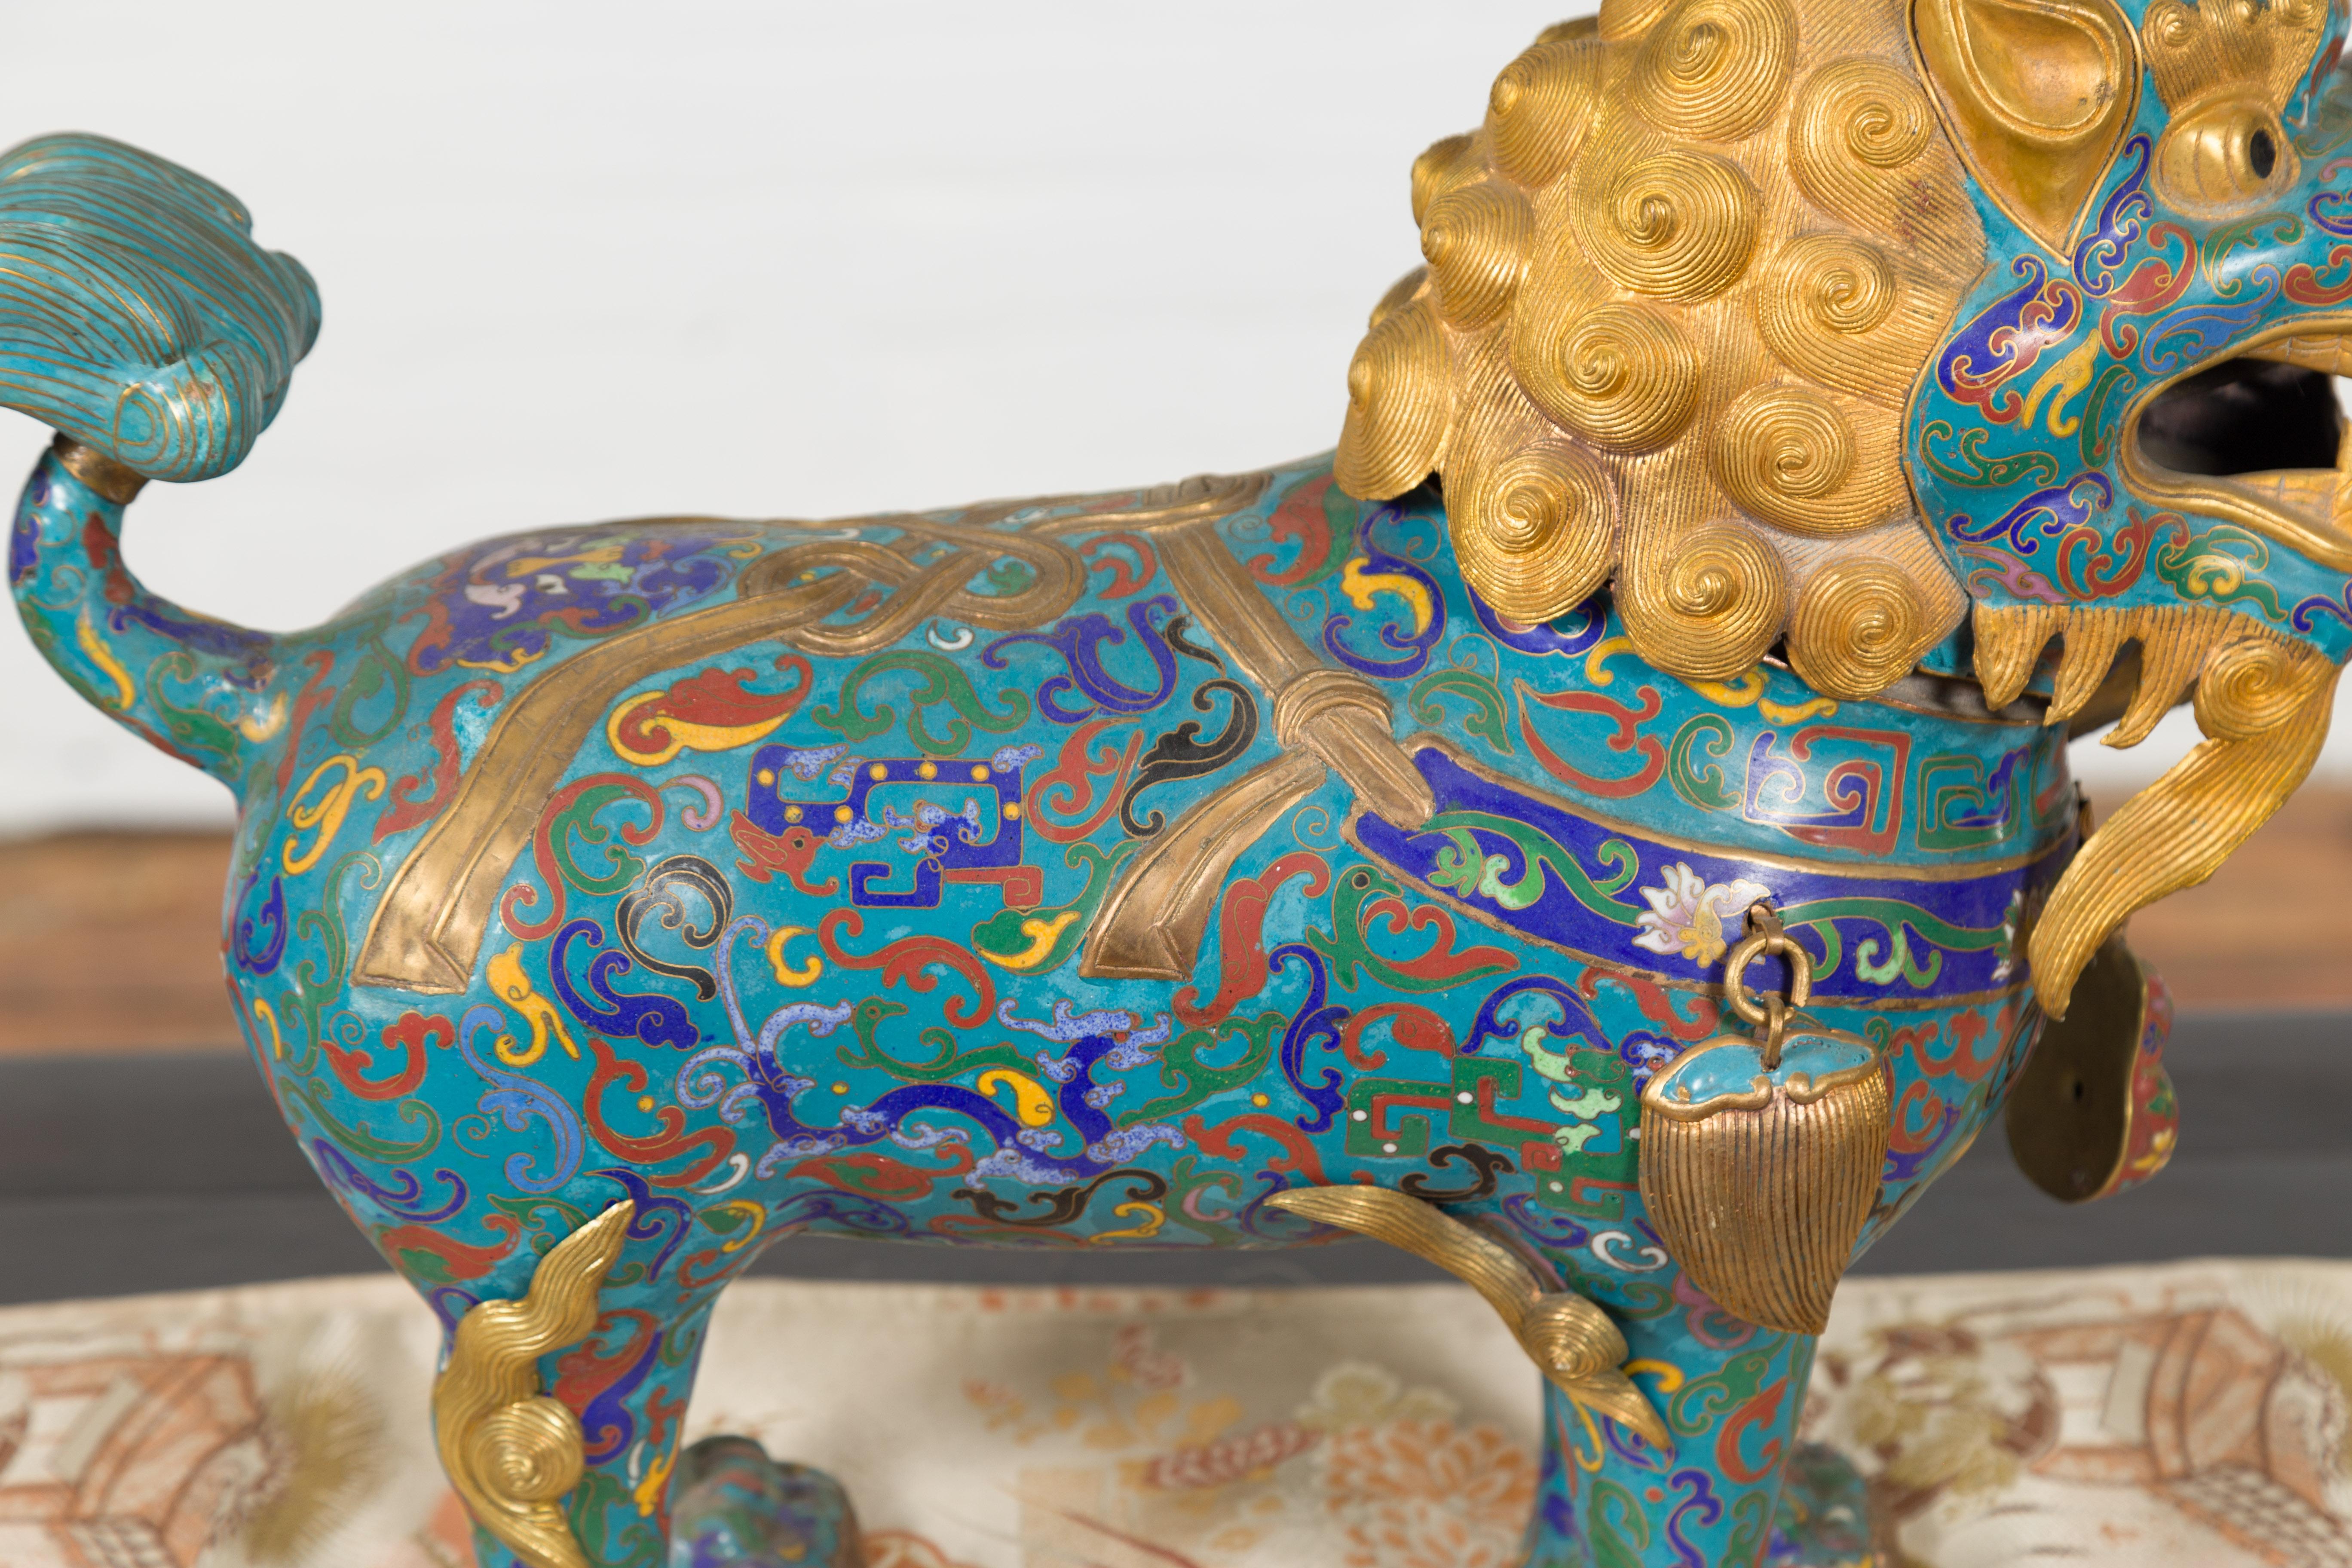 Chinese Vintage Metal Cloisonné Foo Dog Guardian Lion with Teal and Golden Tones 2